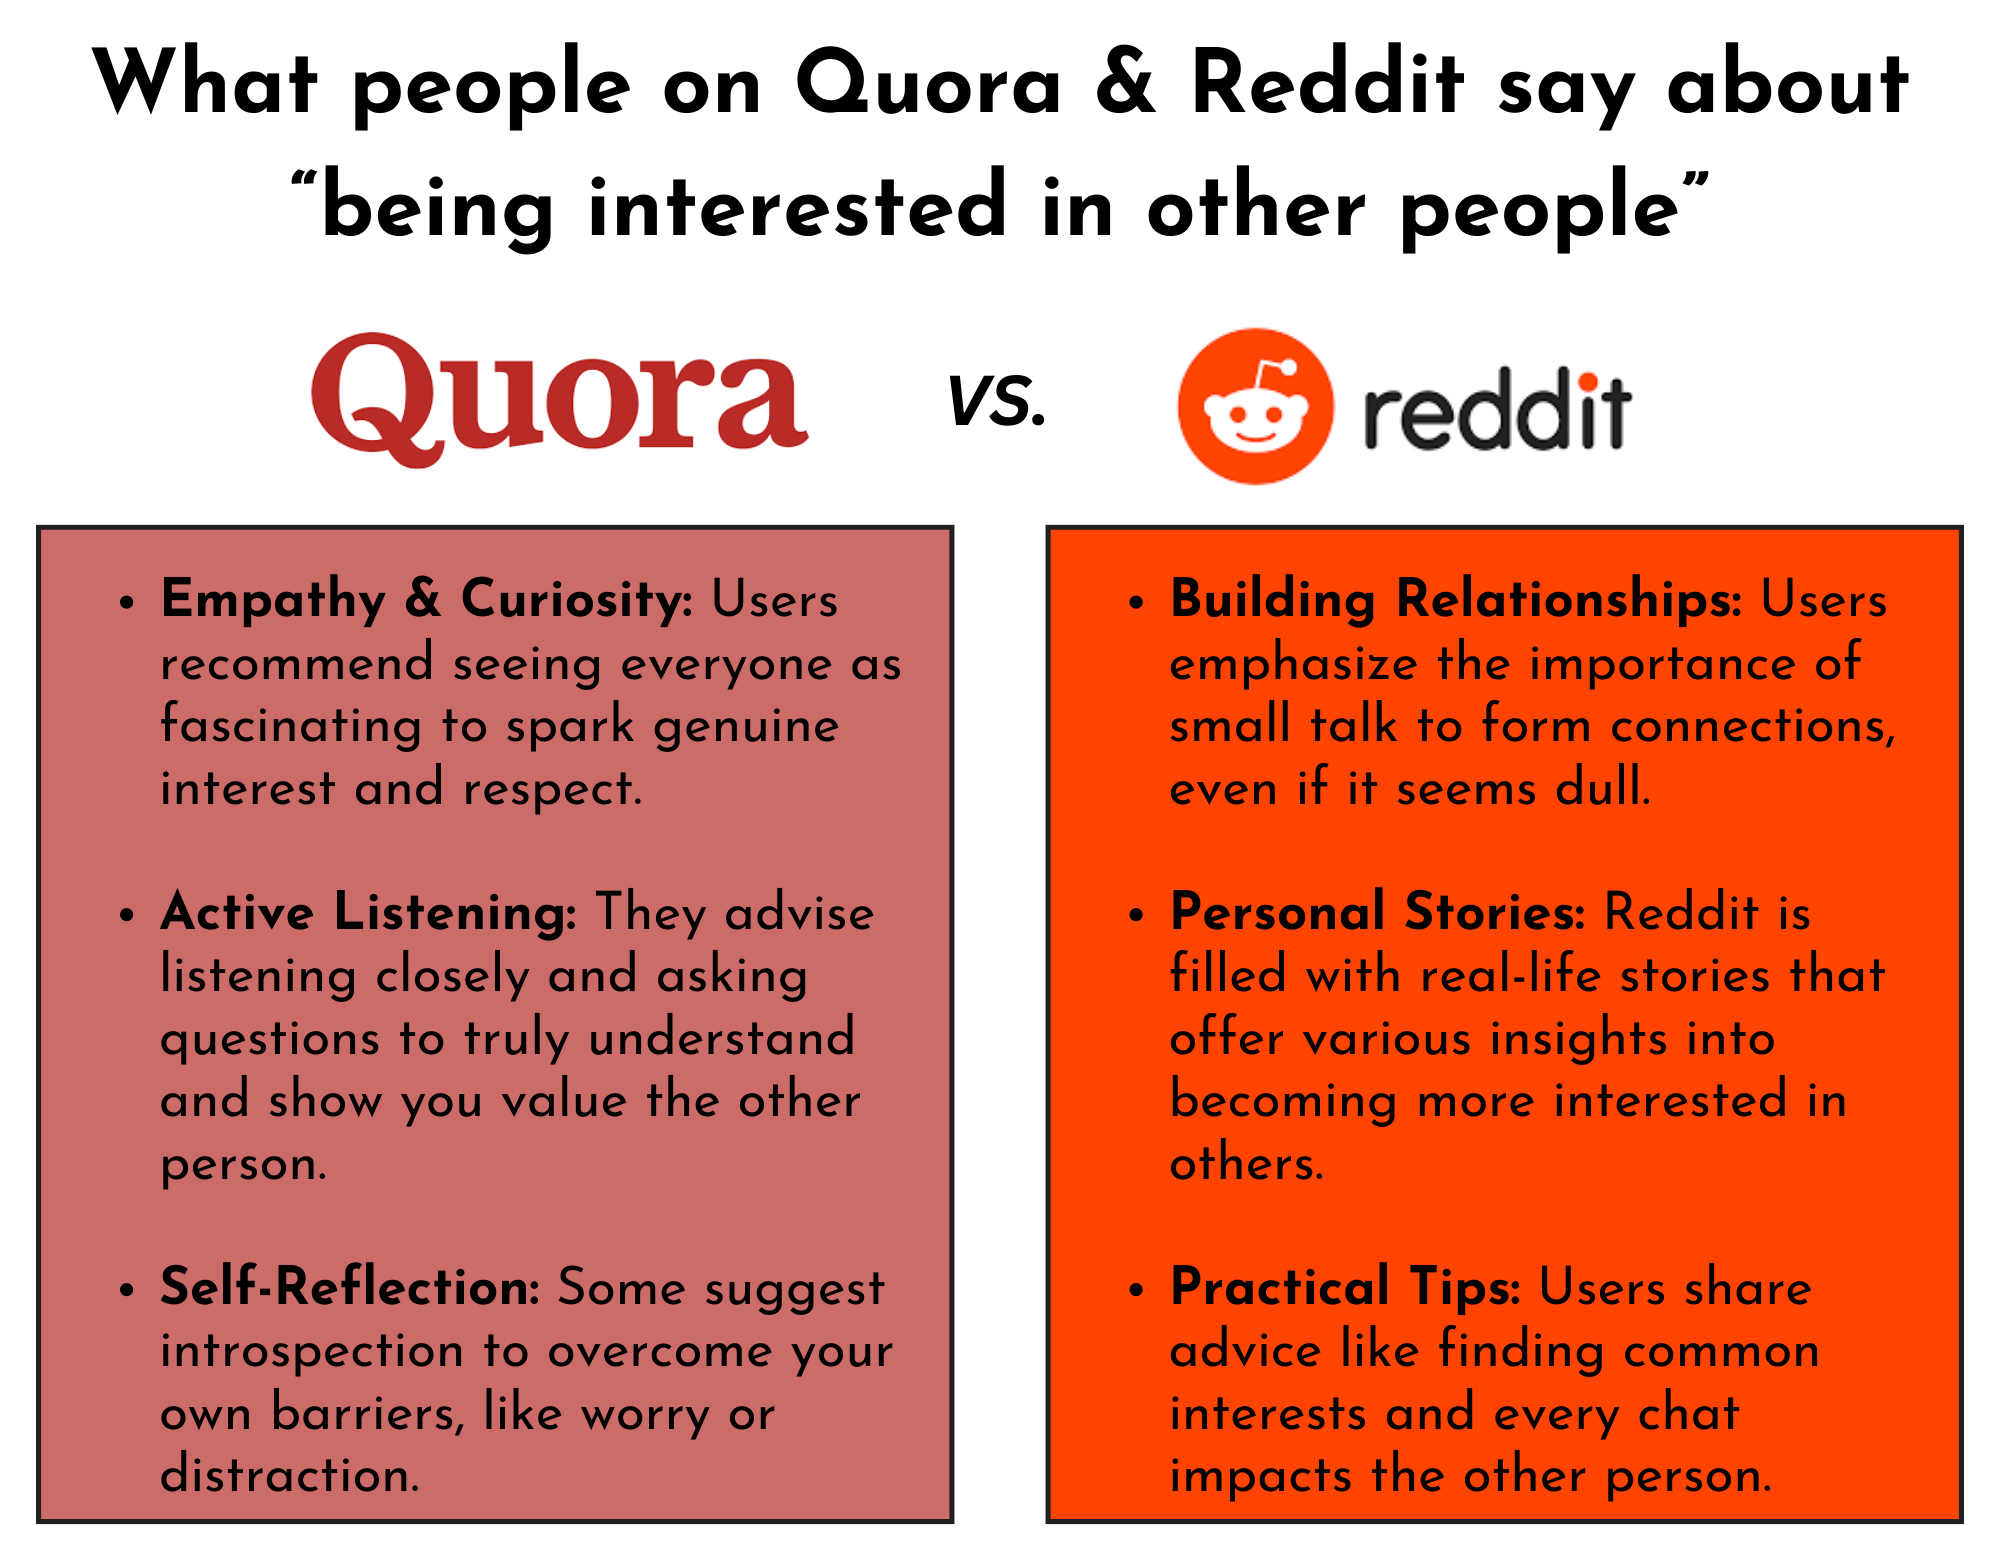 quora and reddit being interested in other people